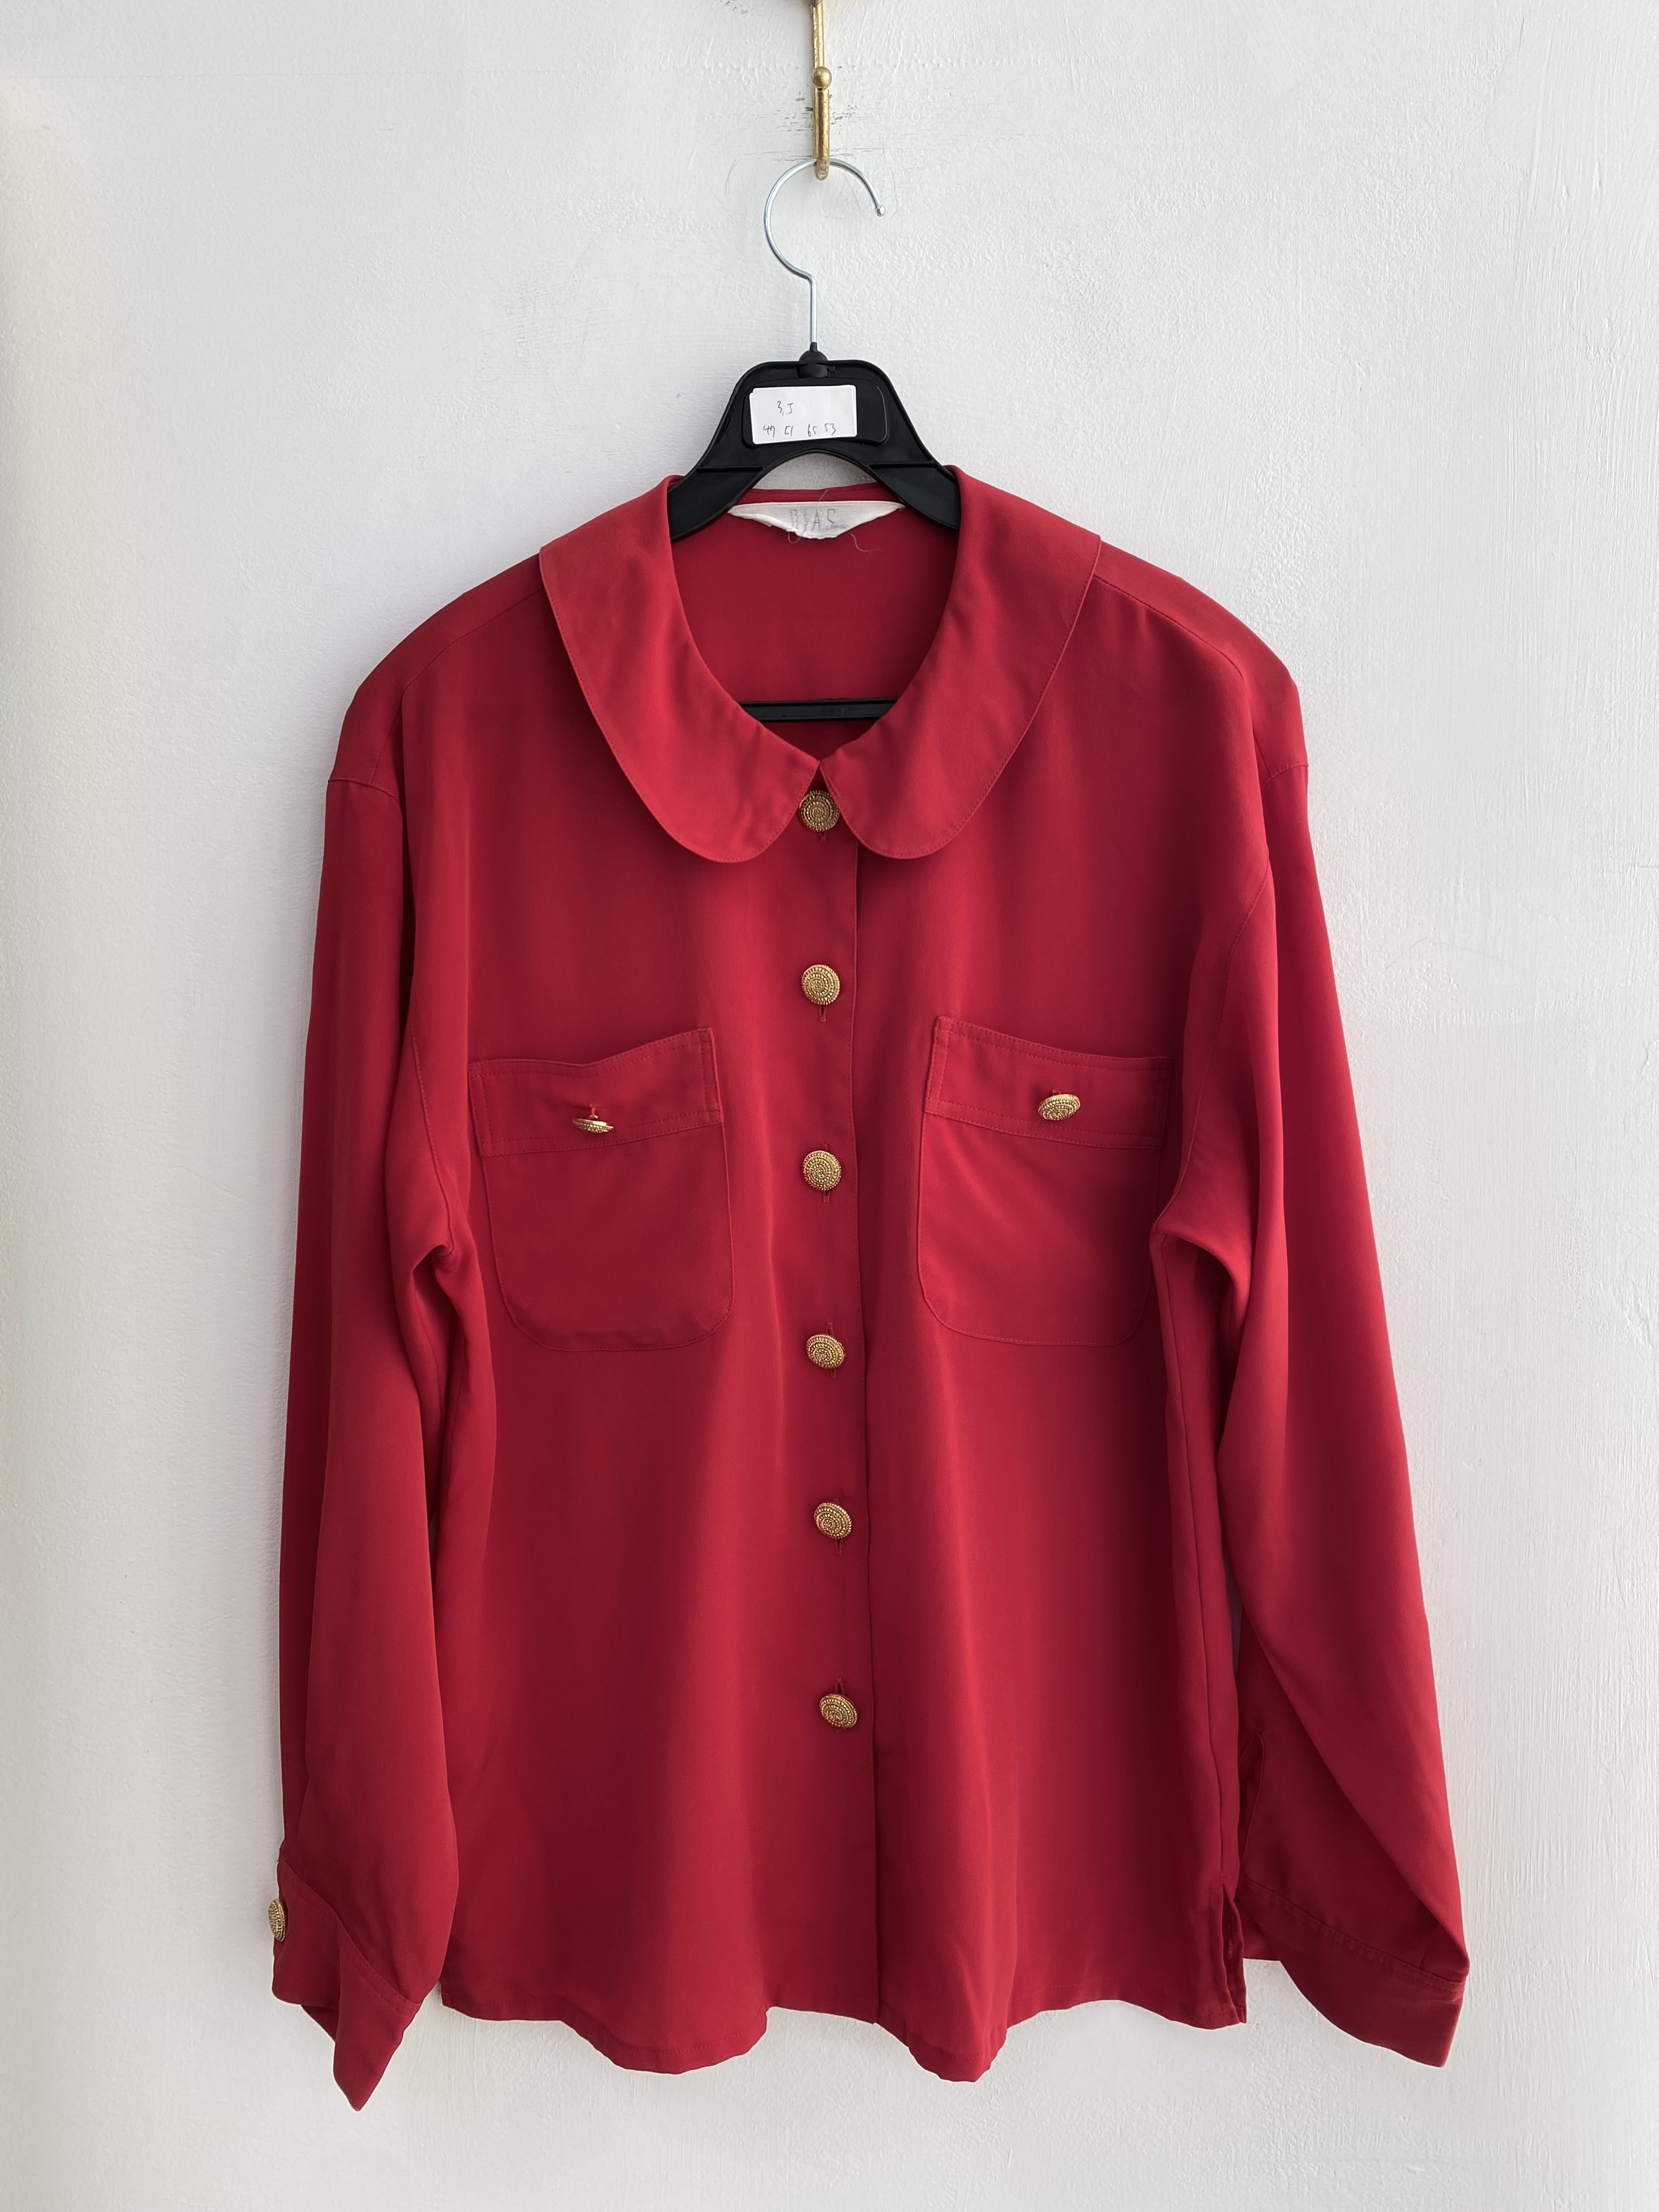 Red two pocket gold button poly shirt blouse